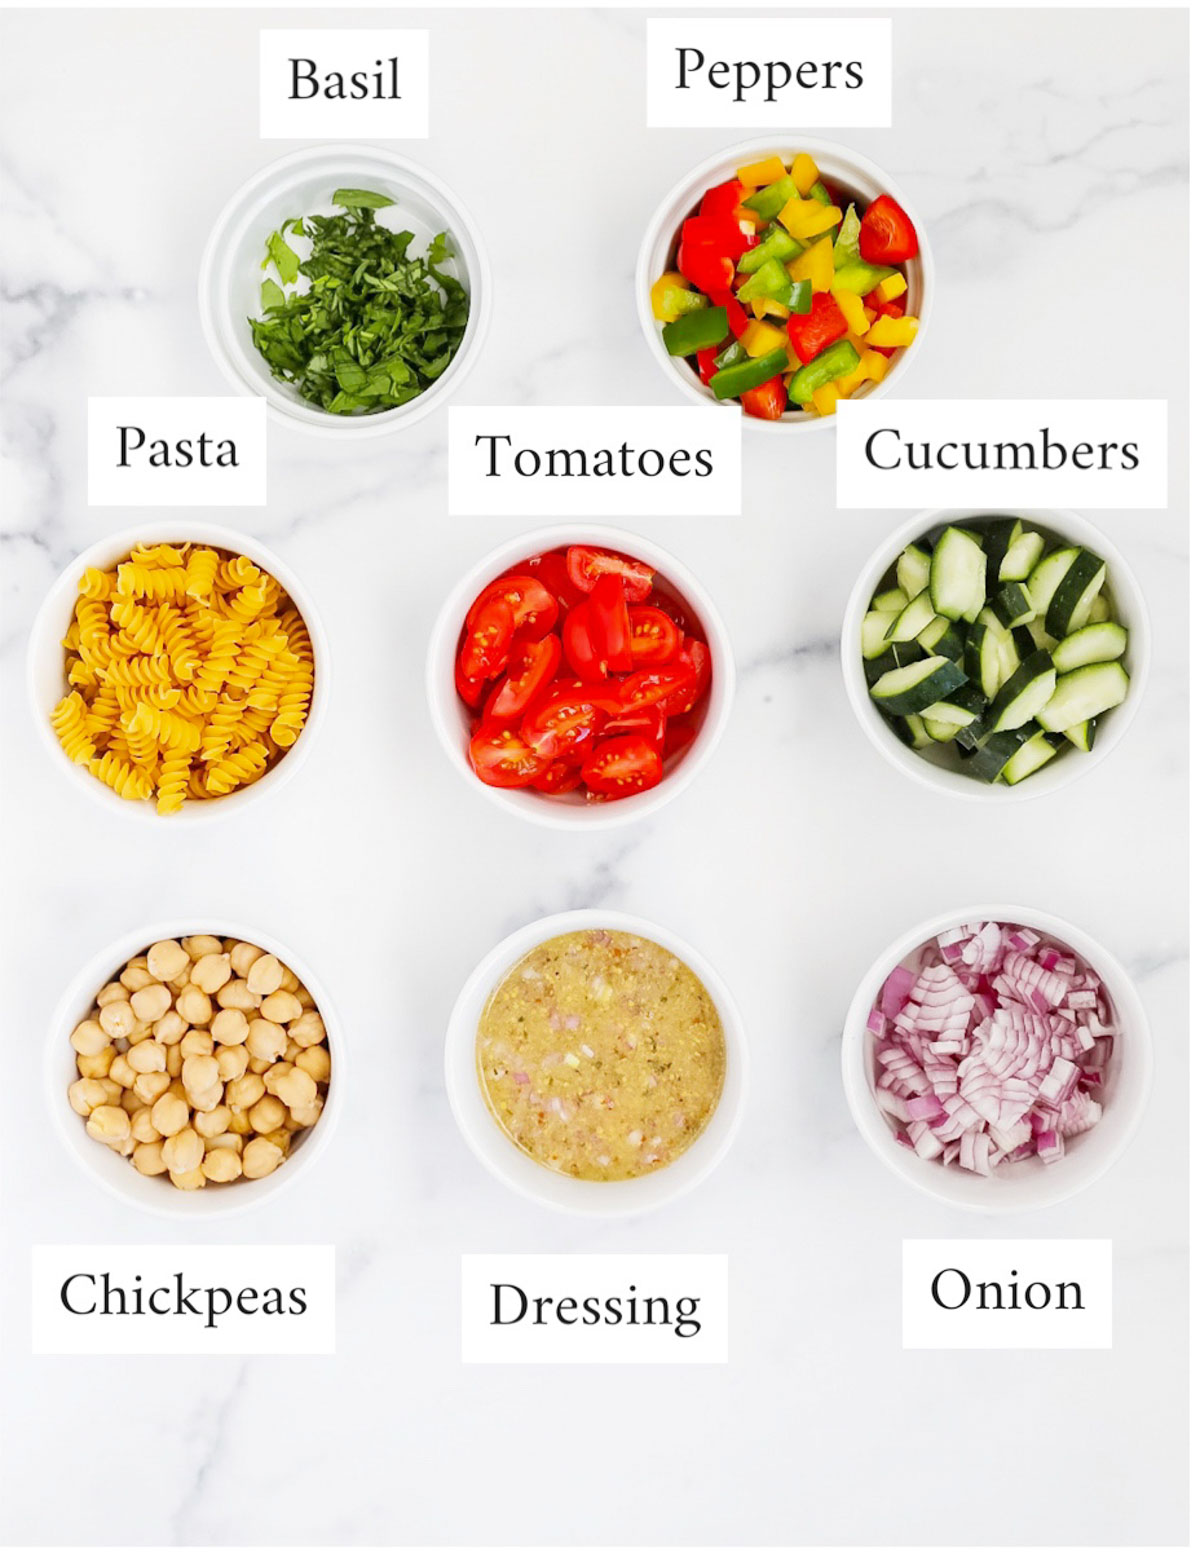 Labeled ingredients in small white bowls including: basil, peppers, pasta, tomatoes, cucumbers, chickpeas, dressing, onion.